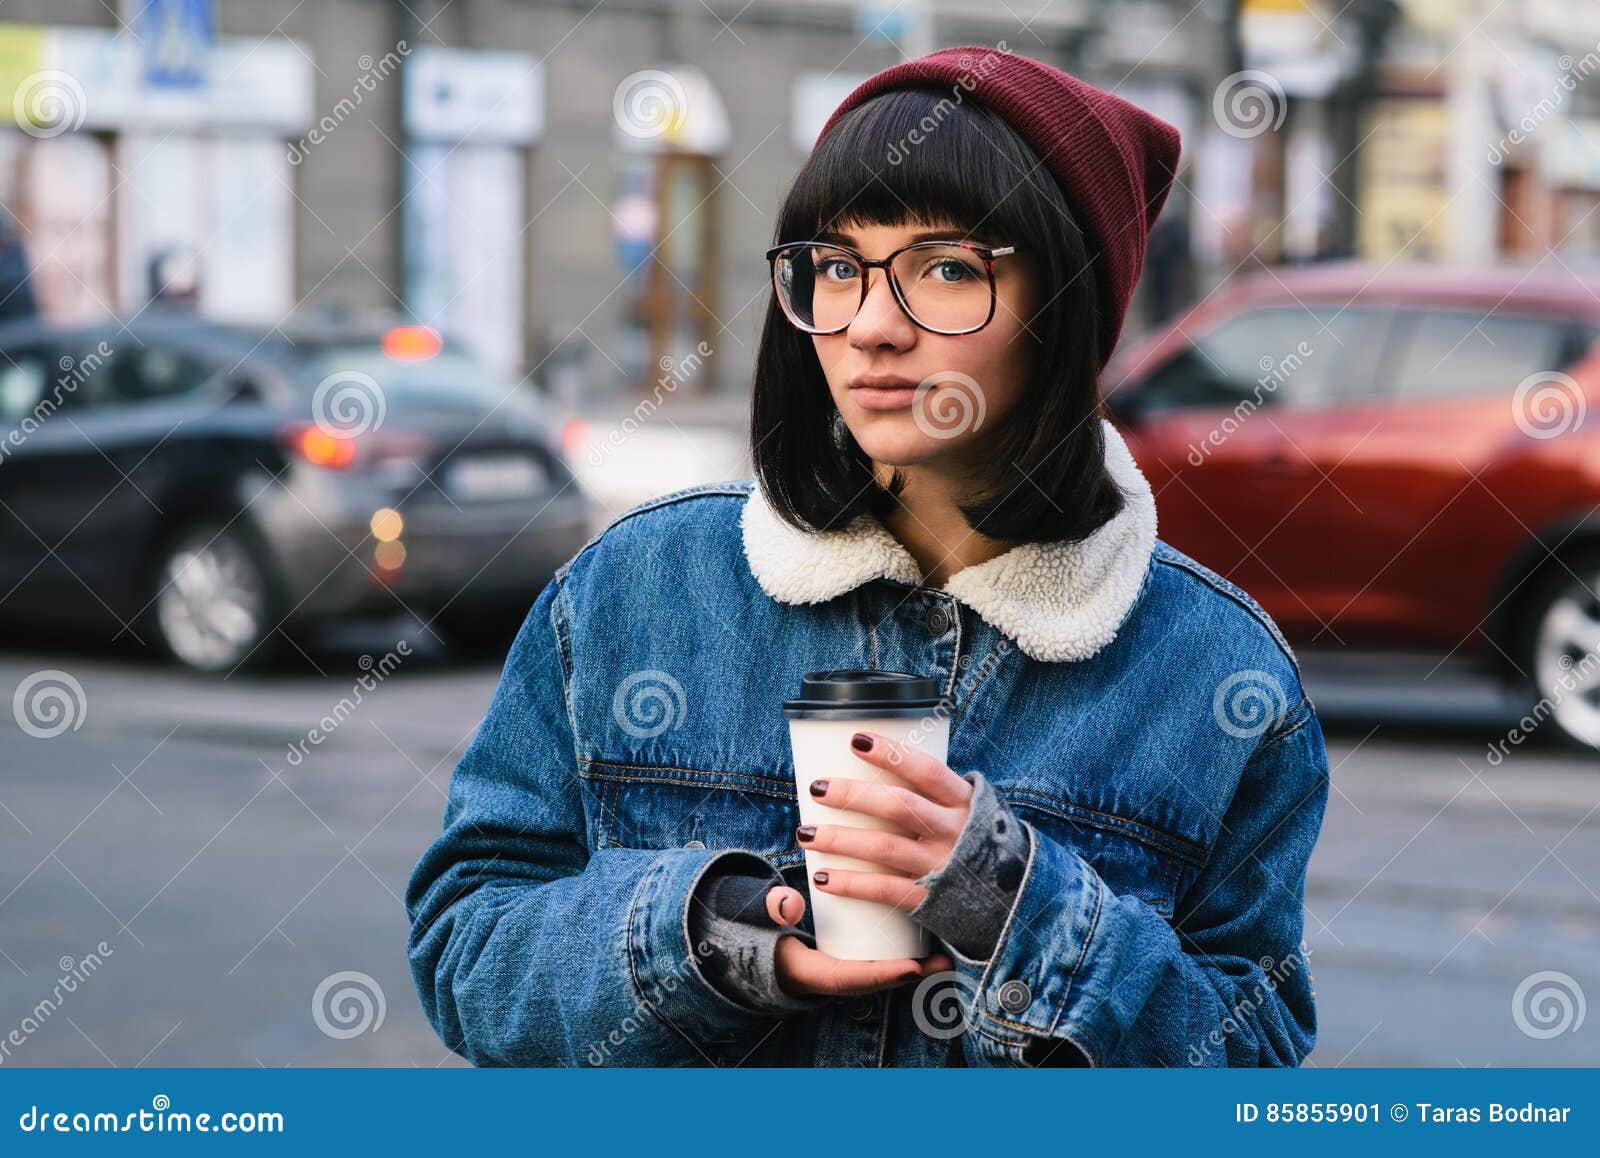 https://thumbs.dreamstime.com/z/stylish-young-hipster-girl-walks-city-drinking-coffee-background-cars-glasses-jeans-jacket-walking-85855901.jpg